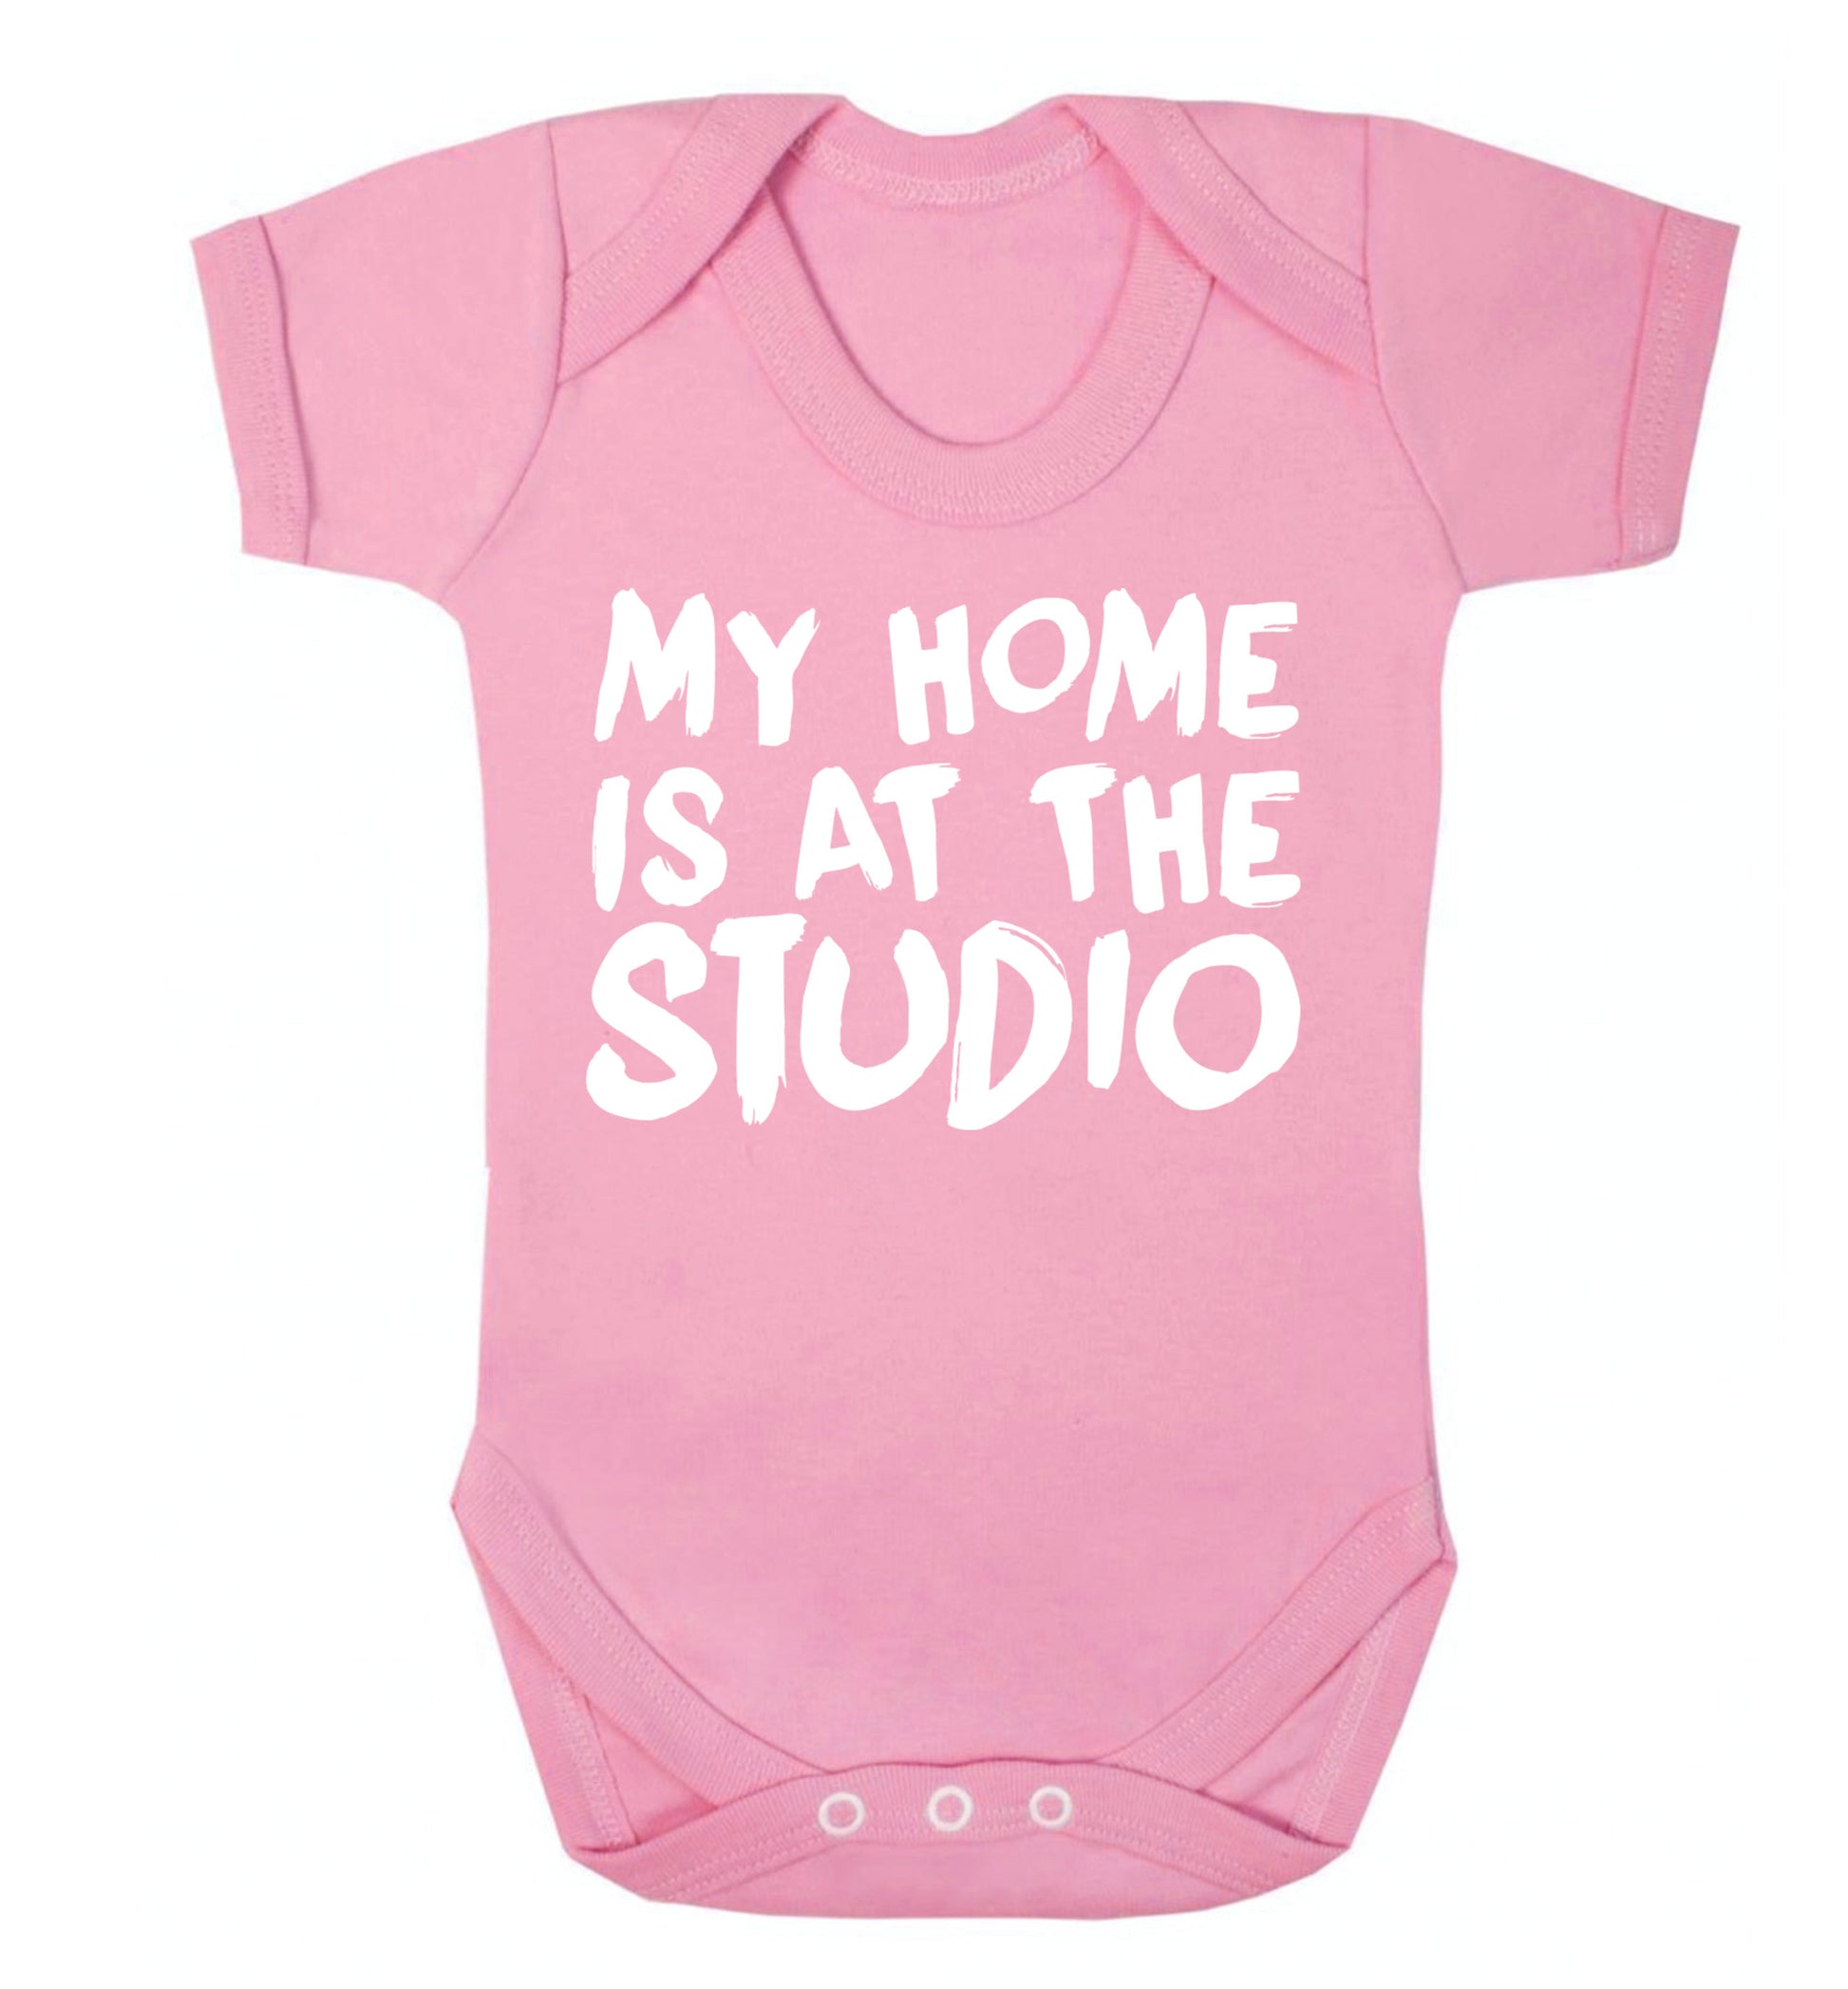 My home is at the studio Baby Vest pale pink 18-24 months